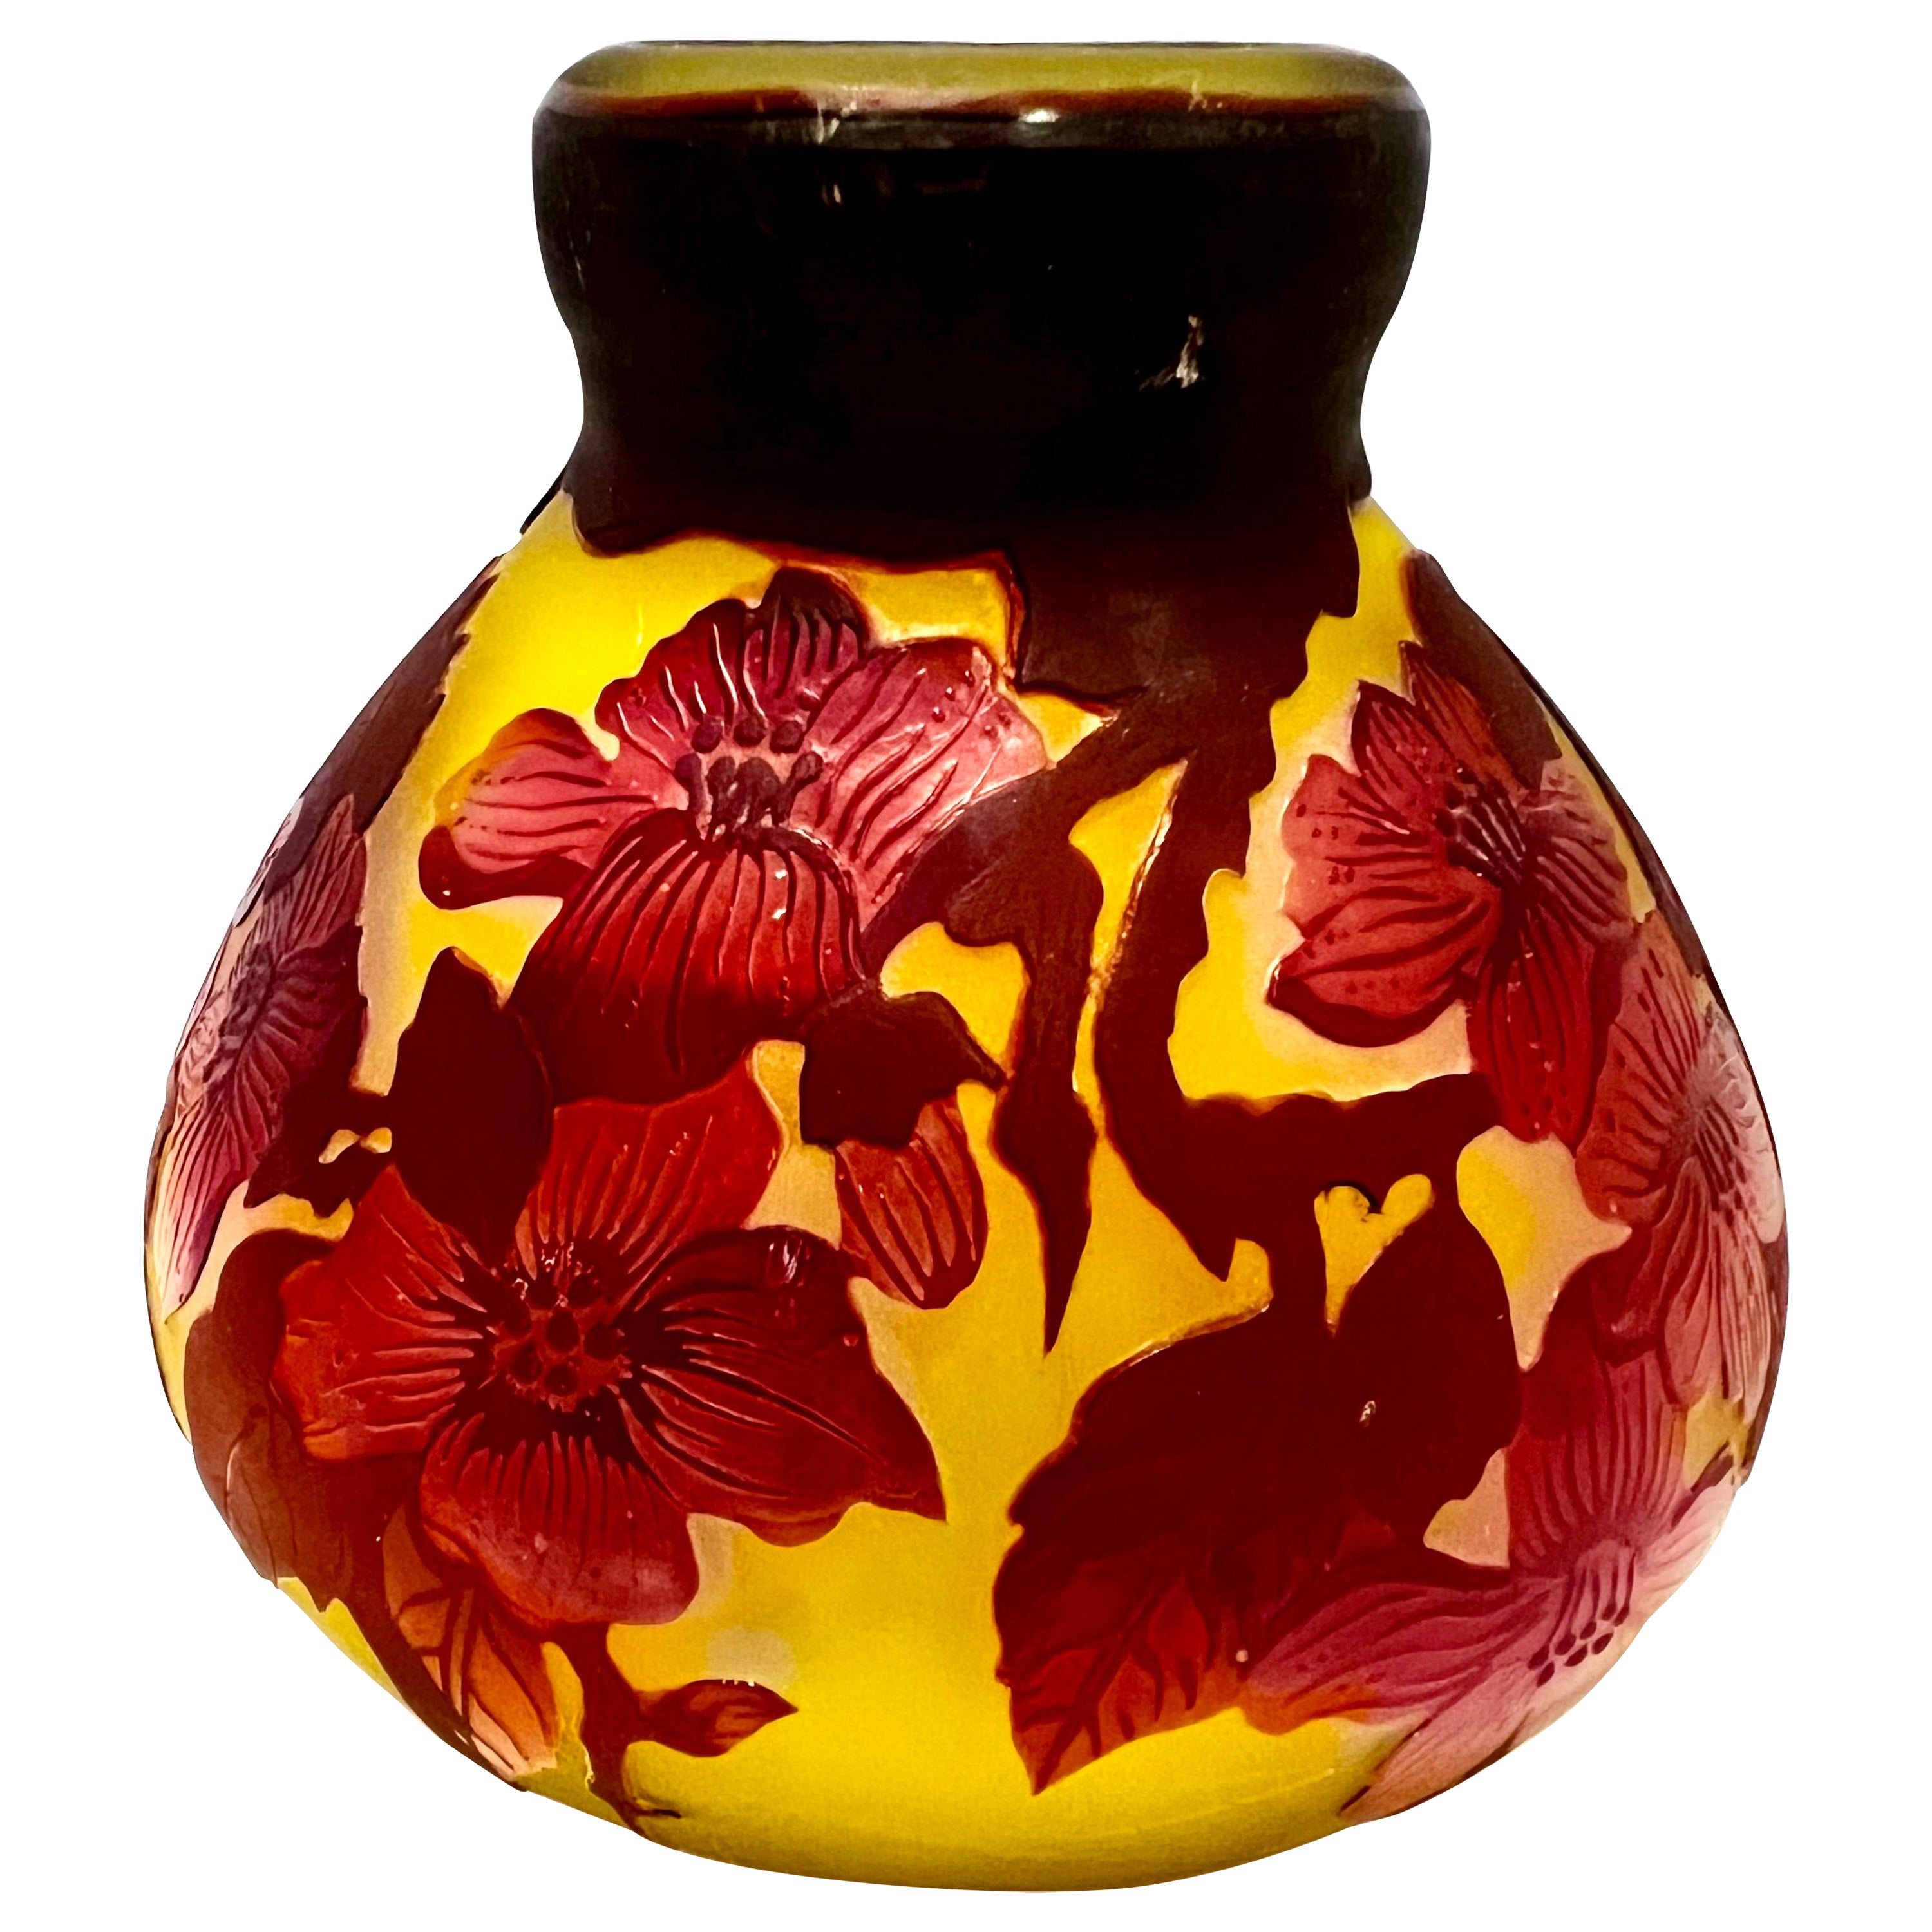 What is a cameo vase?